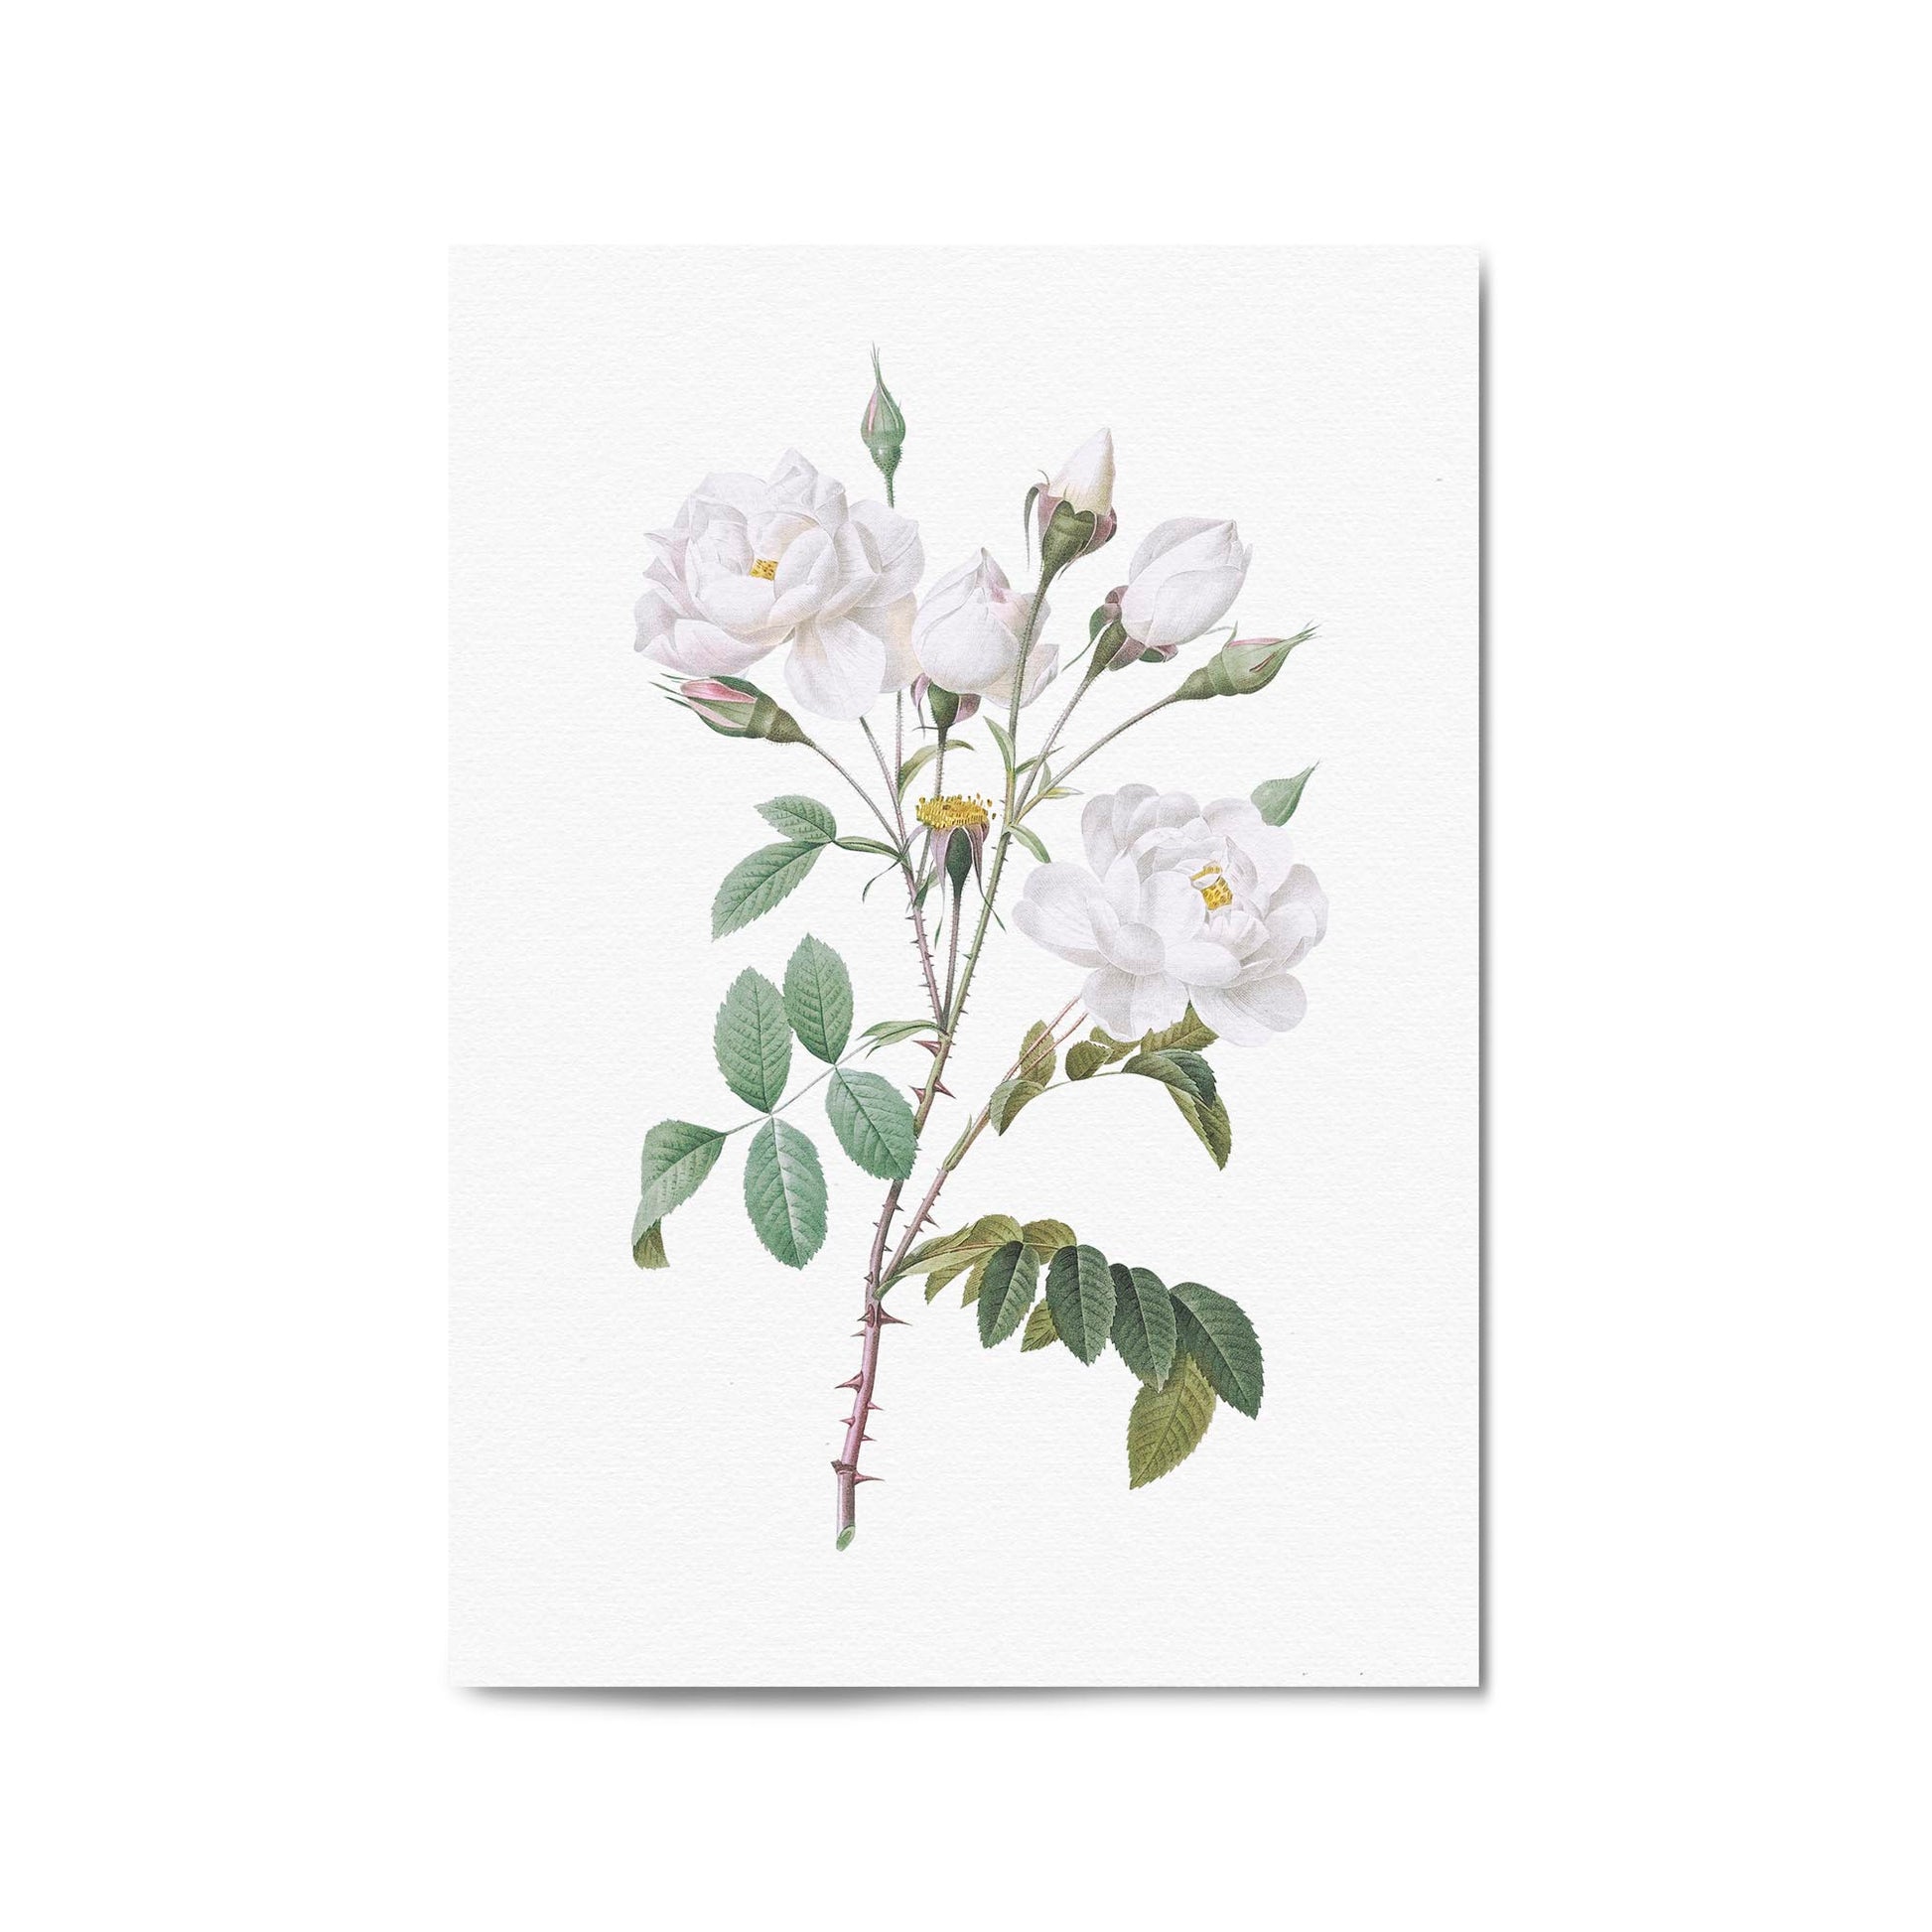 Flower Botanical Painting Kitchen Hallway Wall Art #15 - The Affordable Art Company